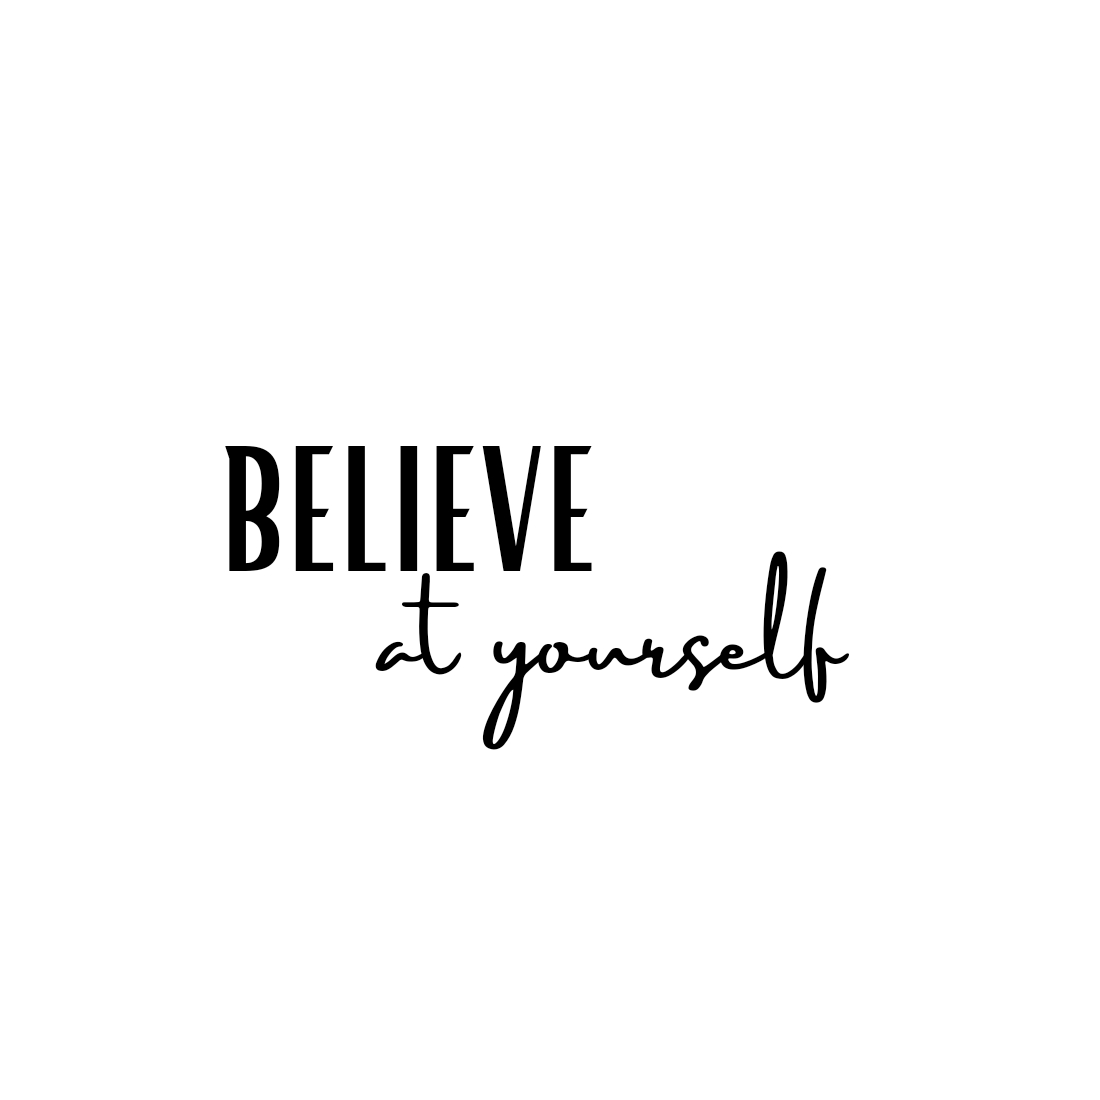 SVG for T Shirt, BELIEVE at yourself SVG, BELIEVE at yourself PNG preview image.